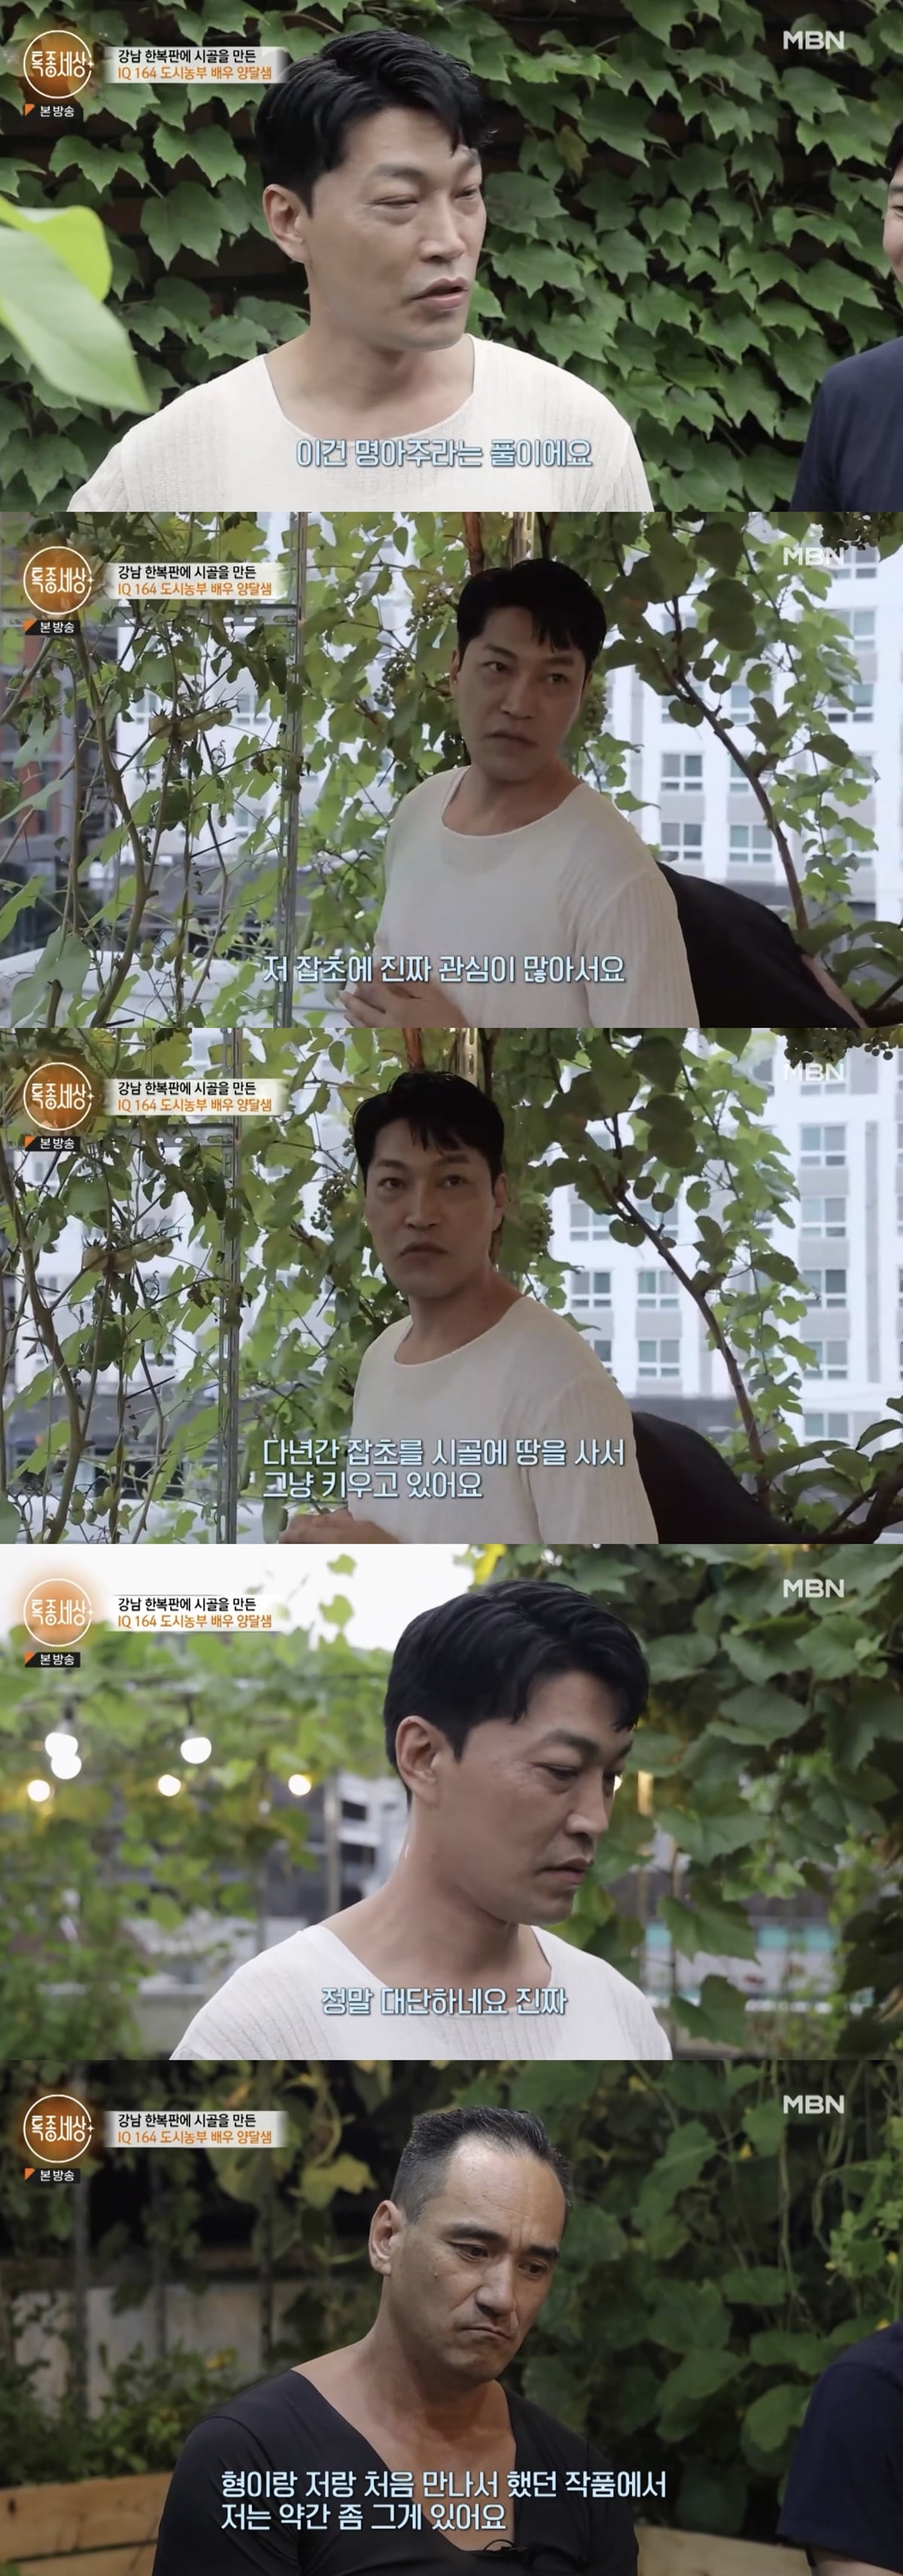 Choi Gwi-hwa "I bought land in the countryside and grew weeds for many years"